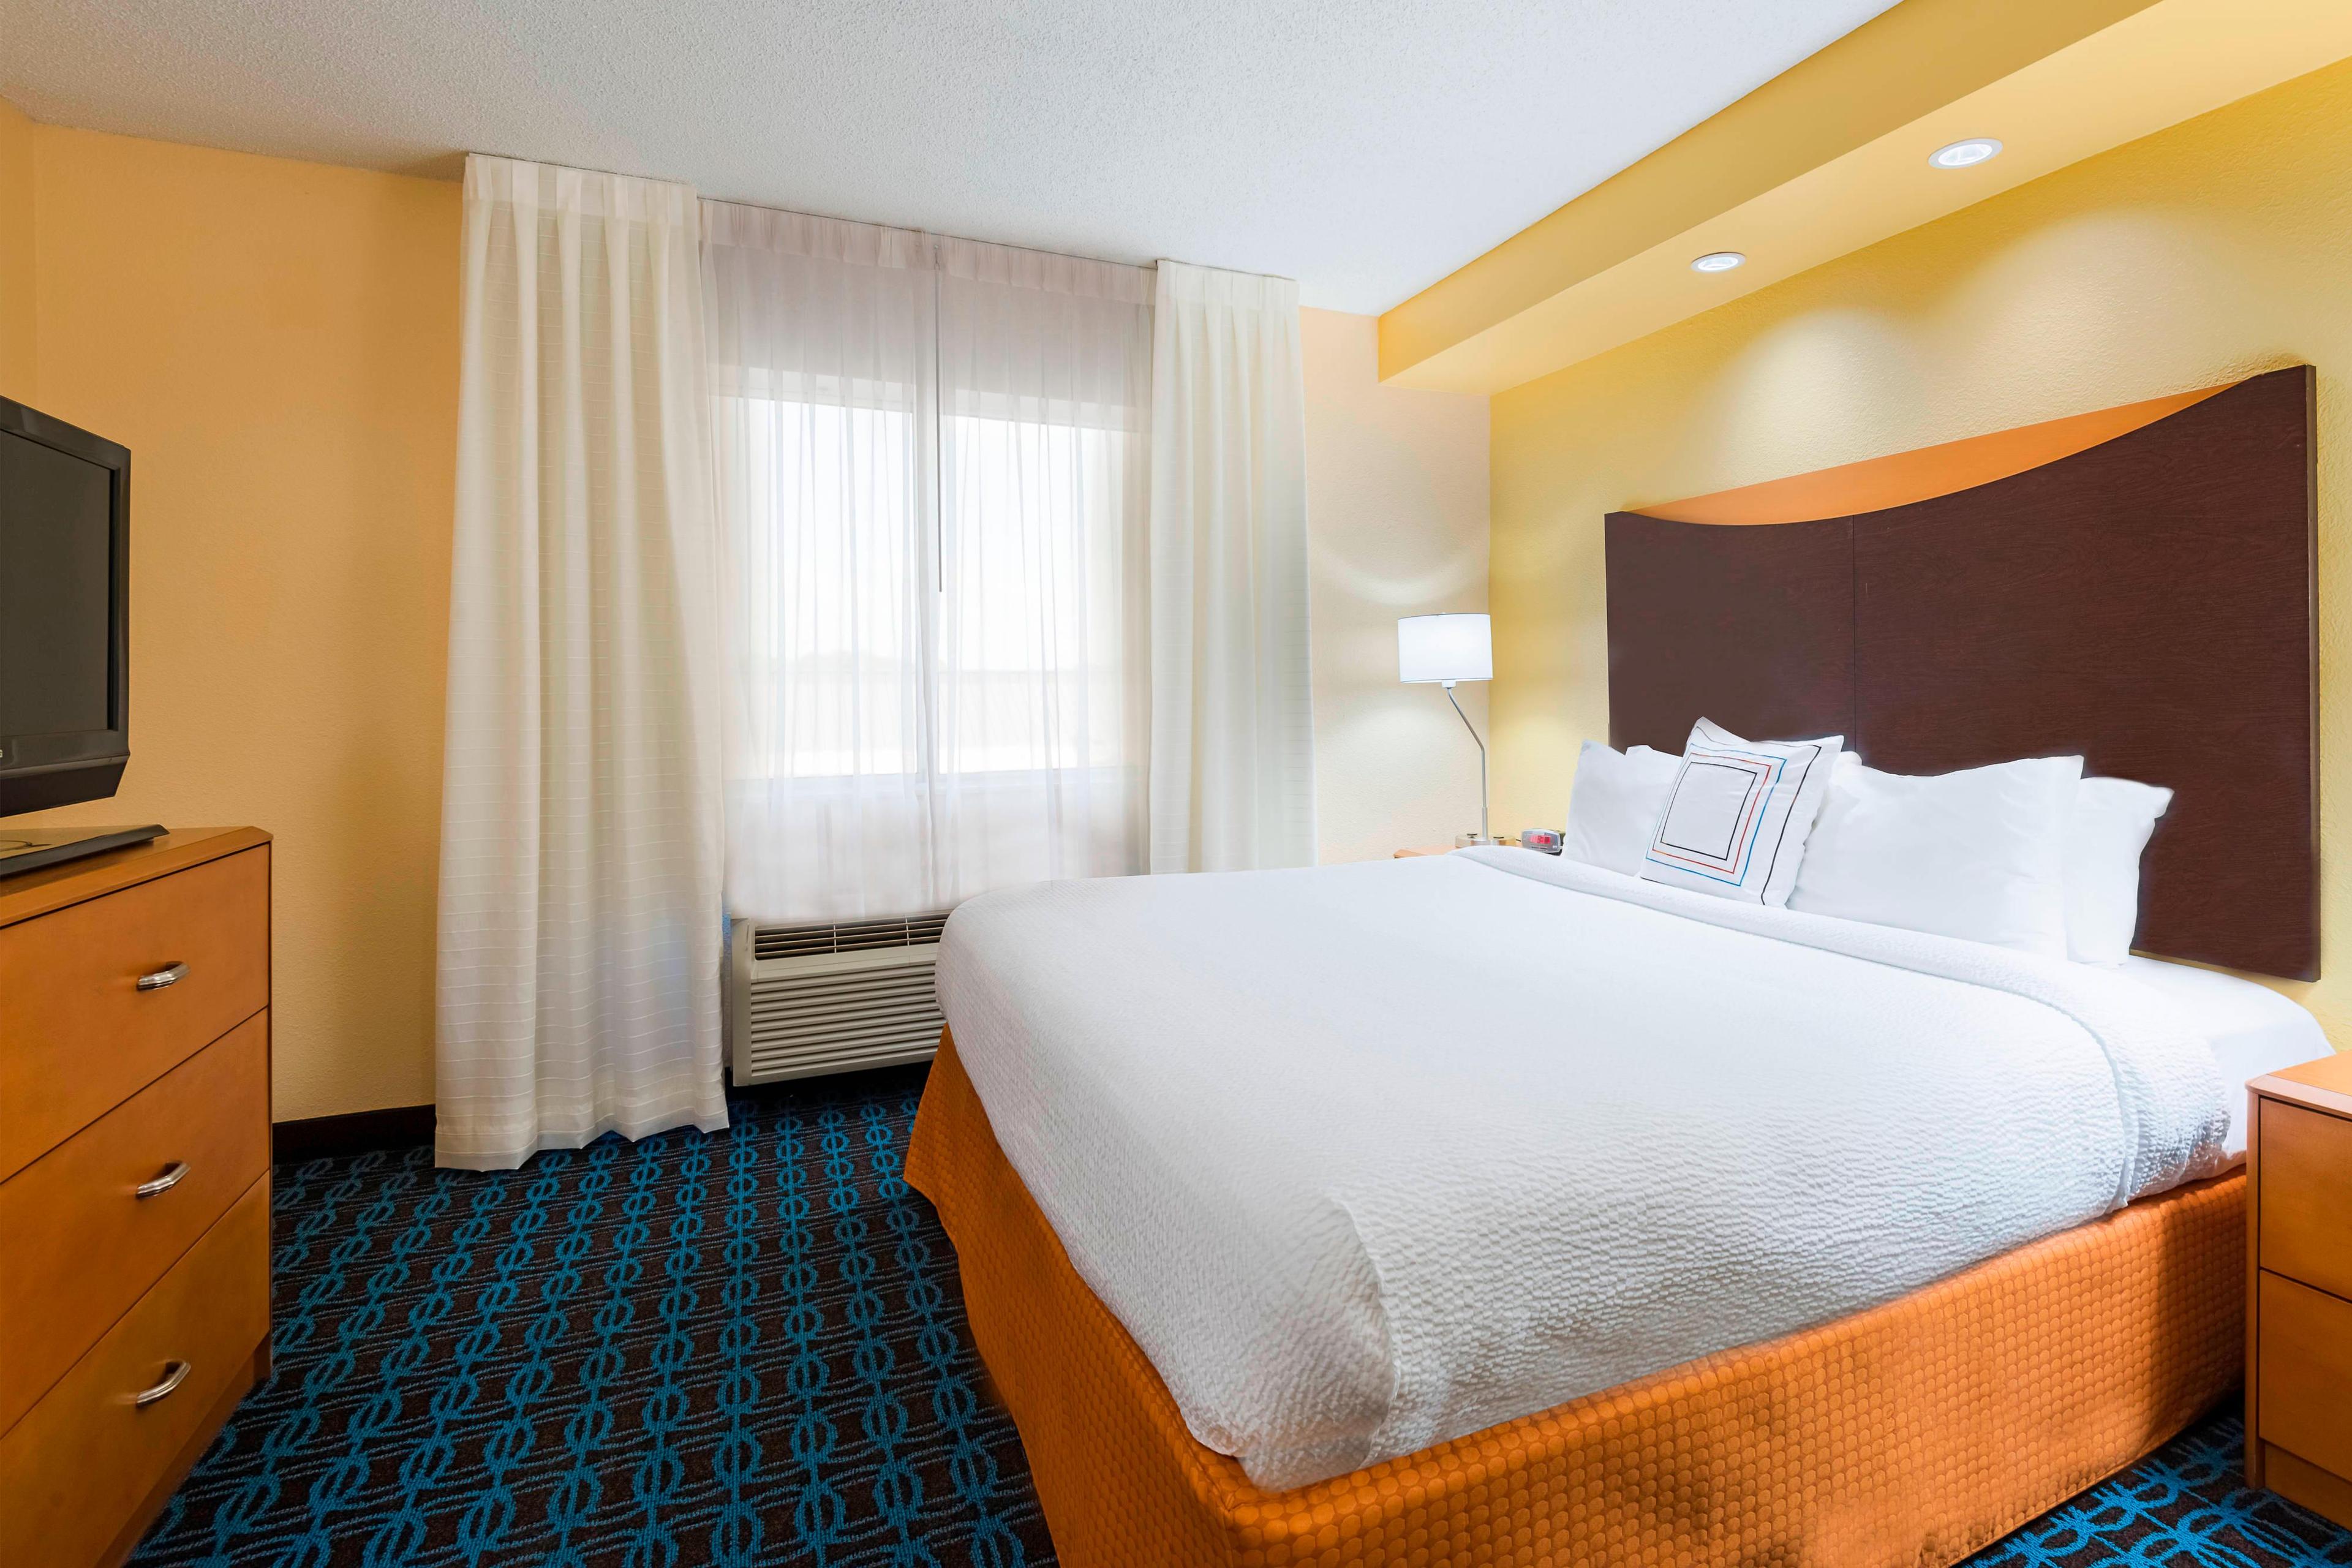 Our Fairfield Inn & Suites in Mobile features rooms with one king or two double beds and a King Suite. Fall in love with our room designs featuring luxurious bedding, crisp linens, plush pillows and thick comfortable mattresses. Each room has high-speed Internet access and flat-panel HDTVs.